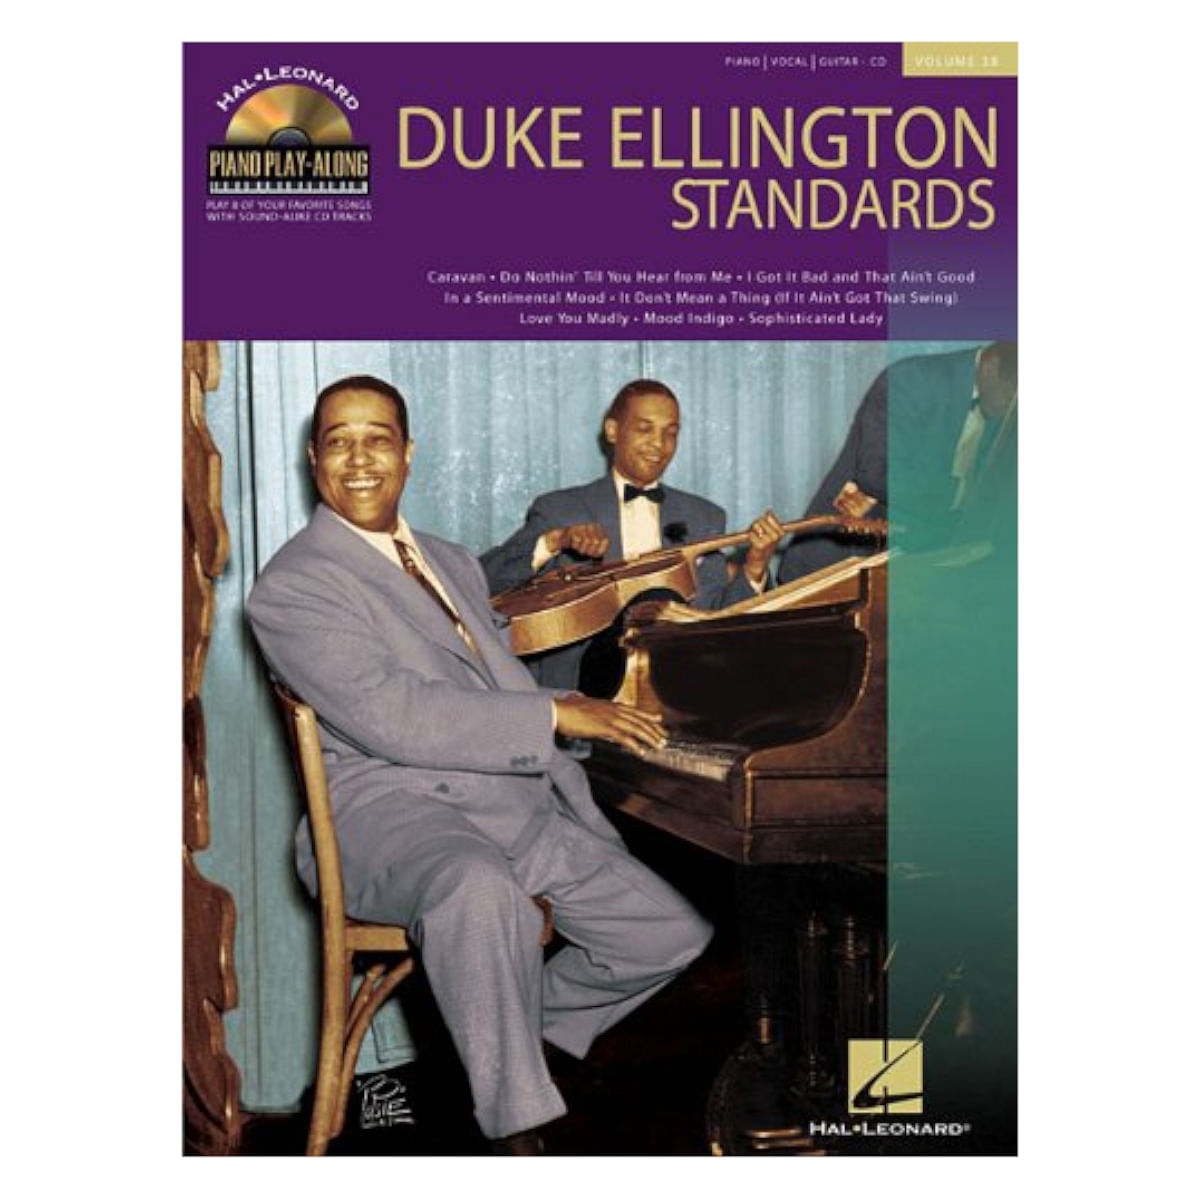 Ellington　Standards,　in　Piano　38　Play-Along　Personalities　Volume　-CD　Best　Groups　Books　India　Buy　Duke